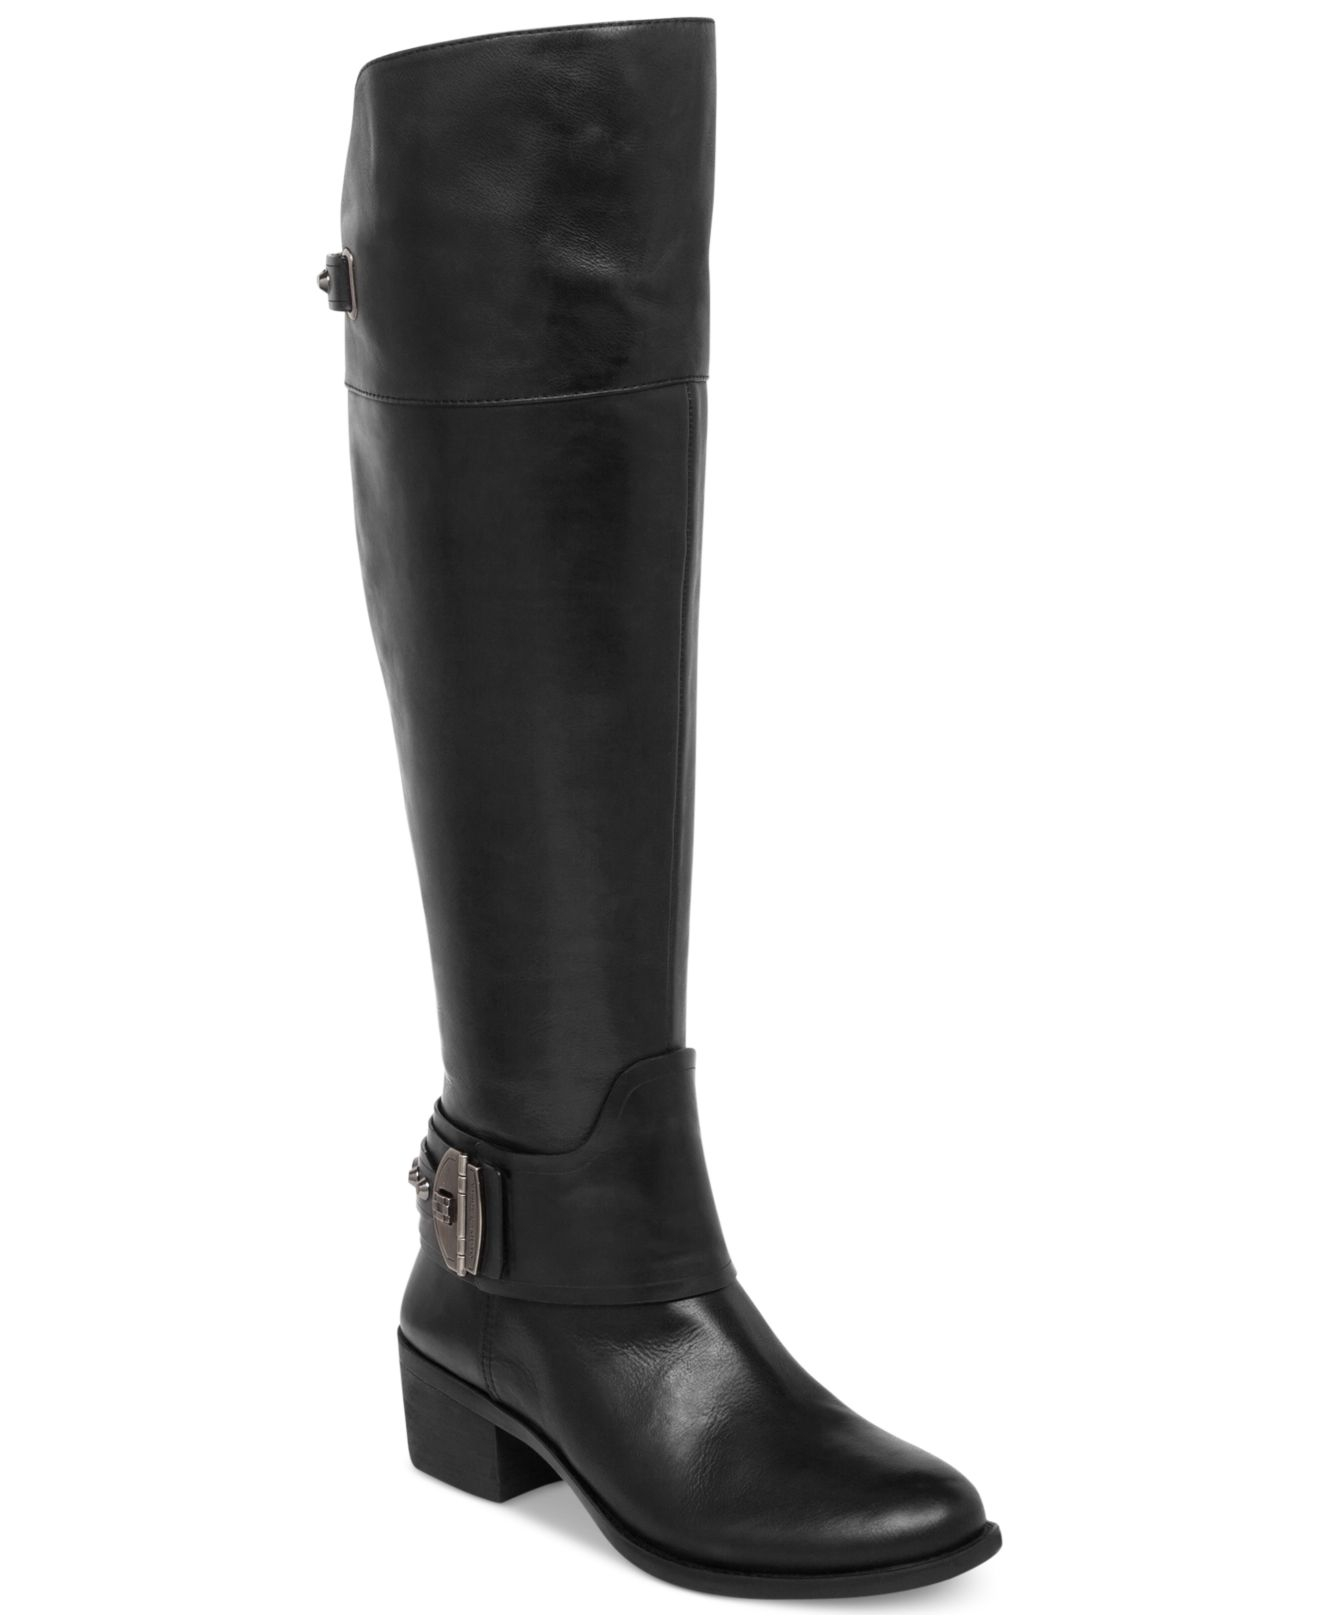 Vince camuto Beatrix Over-The-Knee Wide Calf Riding Boots in Black | Lyst